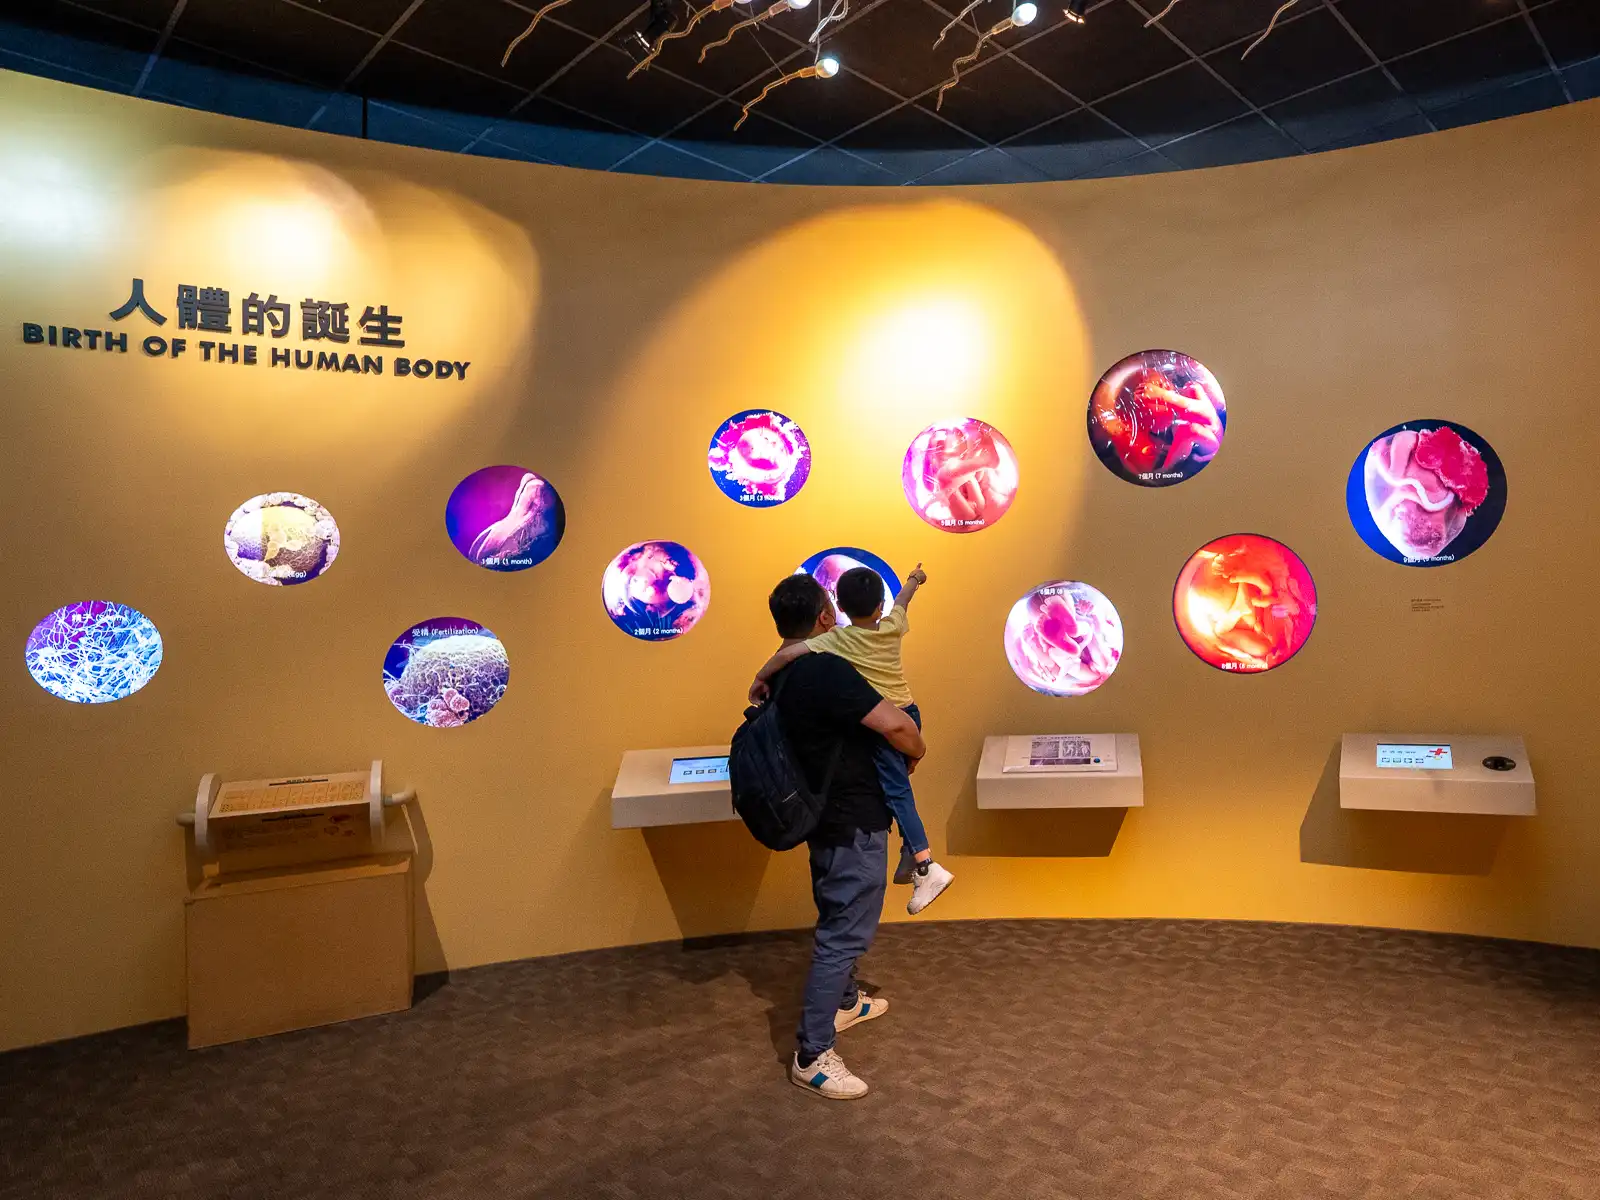 An interactive display called the "Birth of the Human Body" educates on how humans are born.